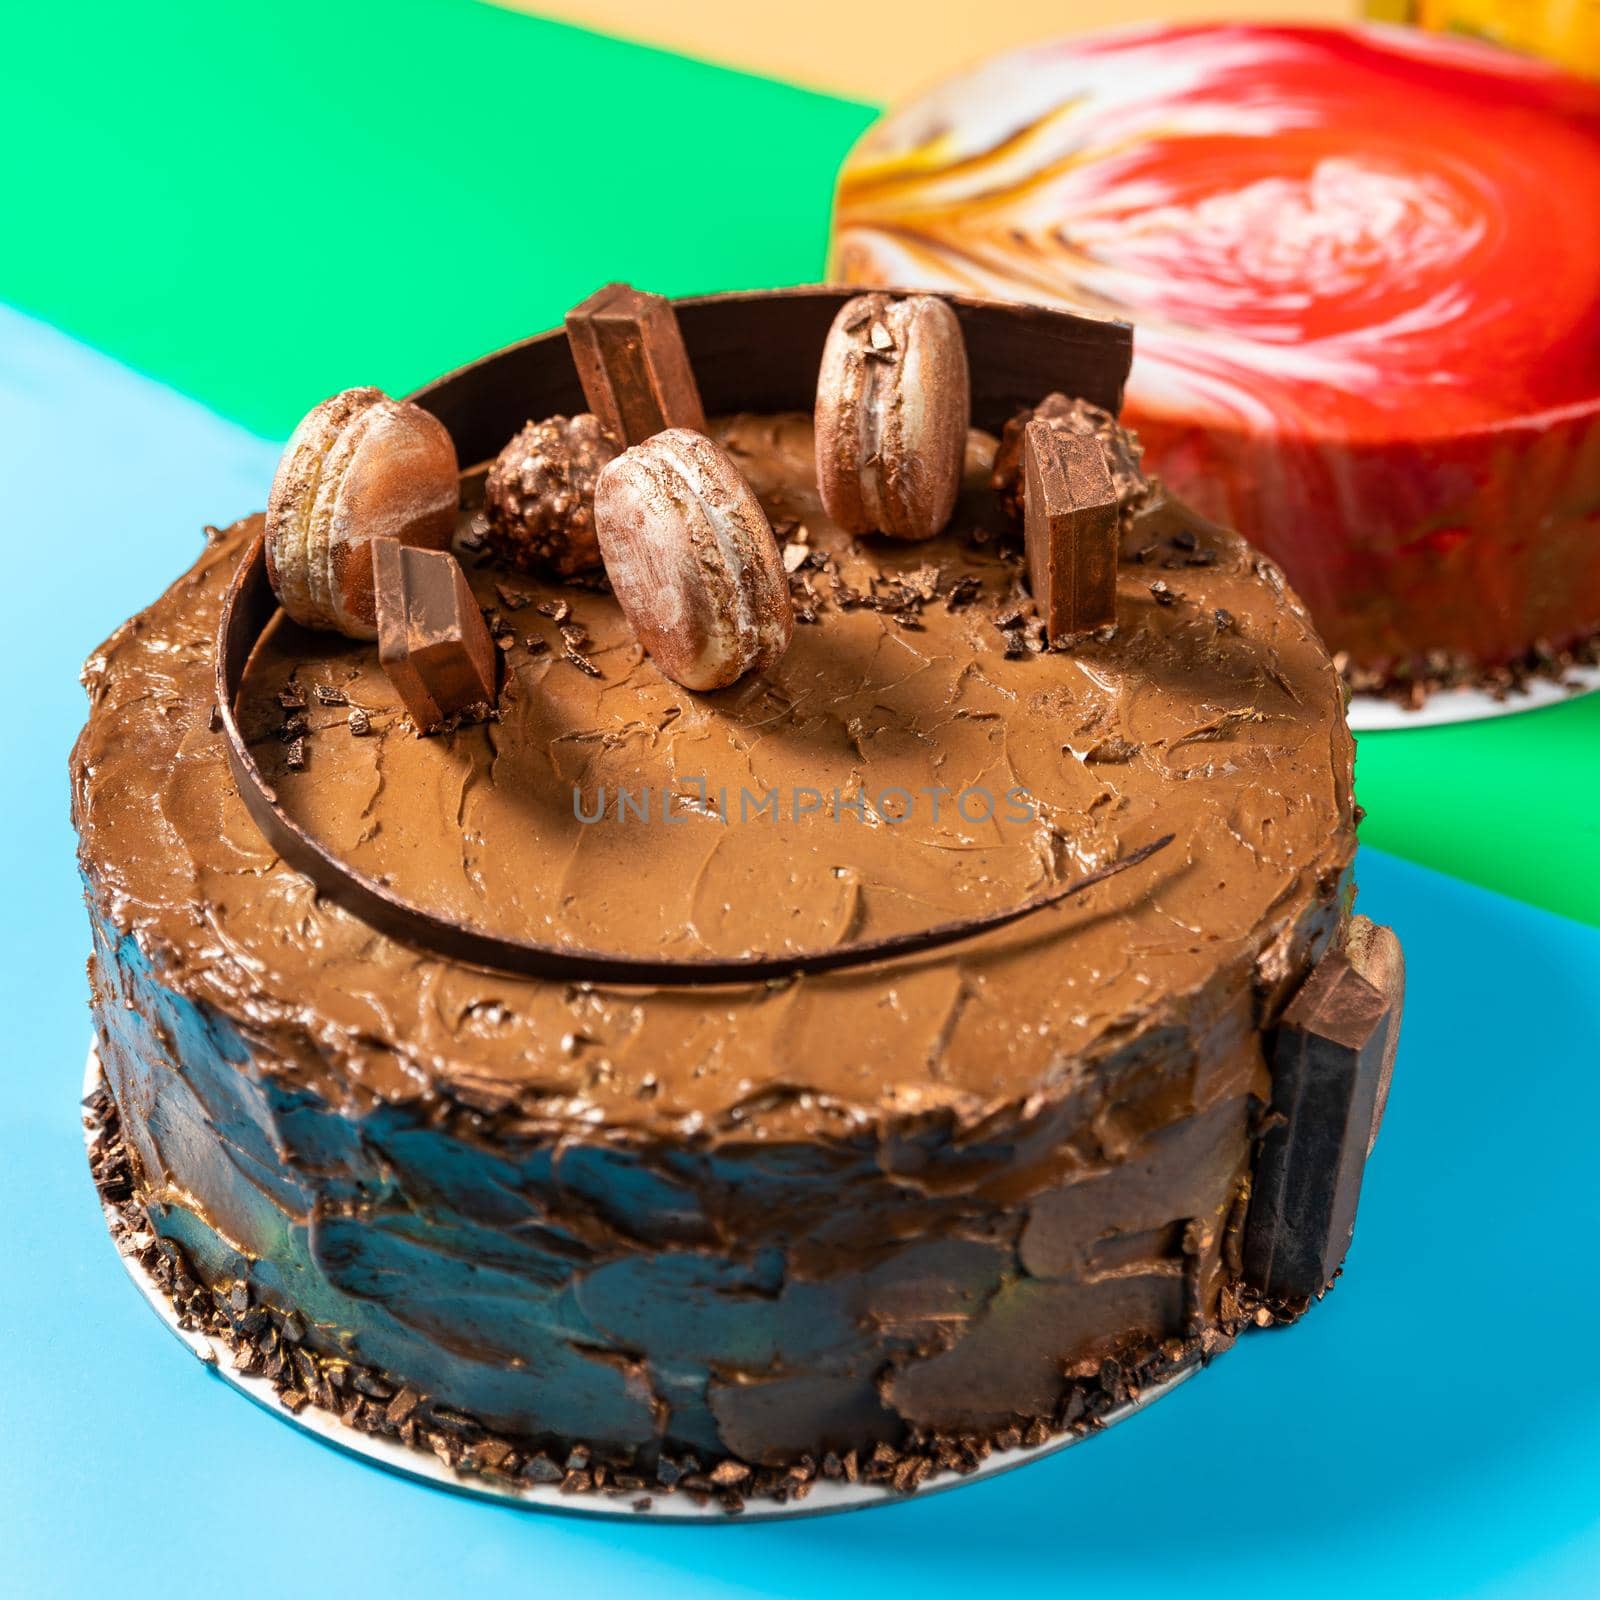 Different beautiful chocolate macaron cake on the colorful background